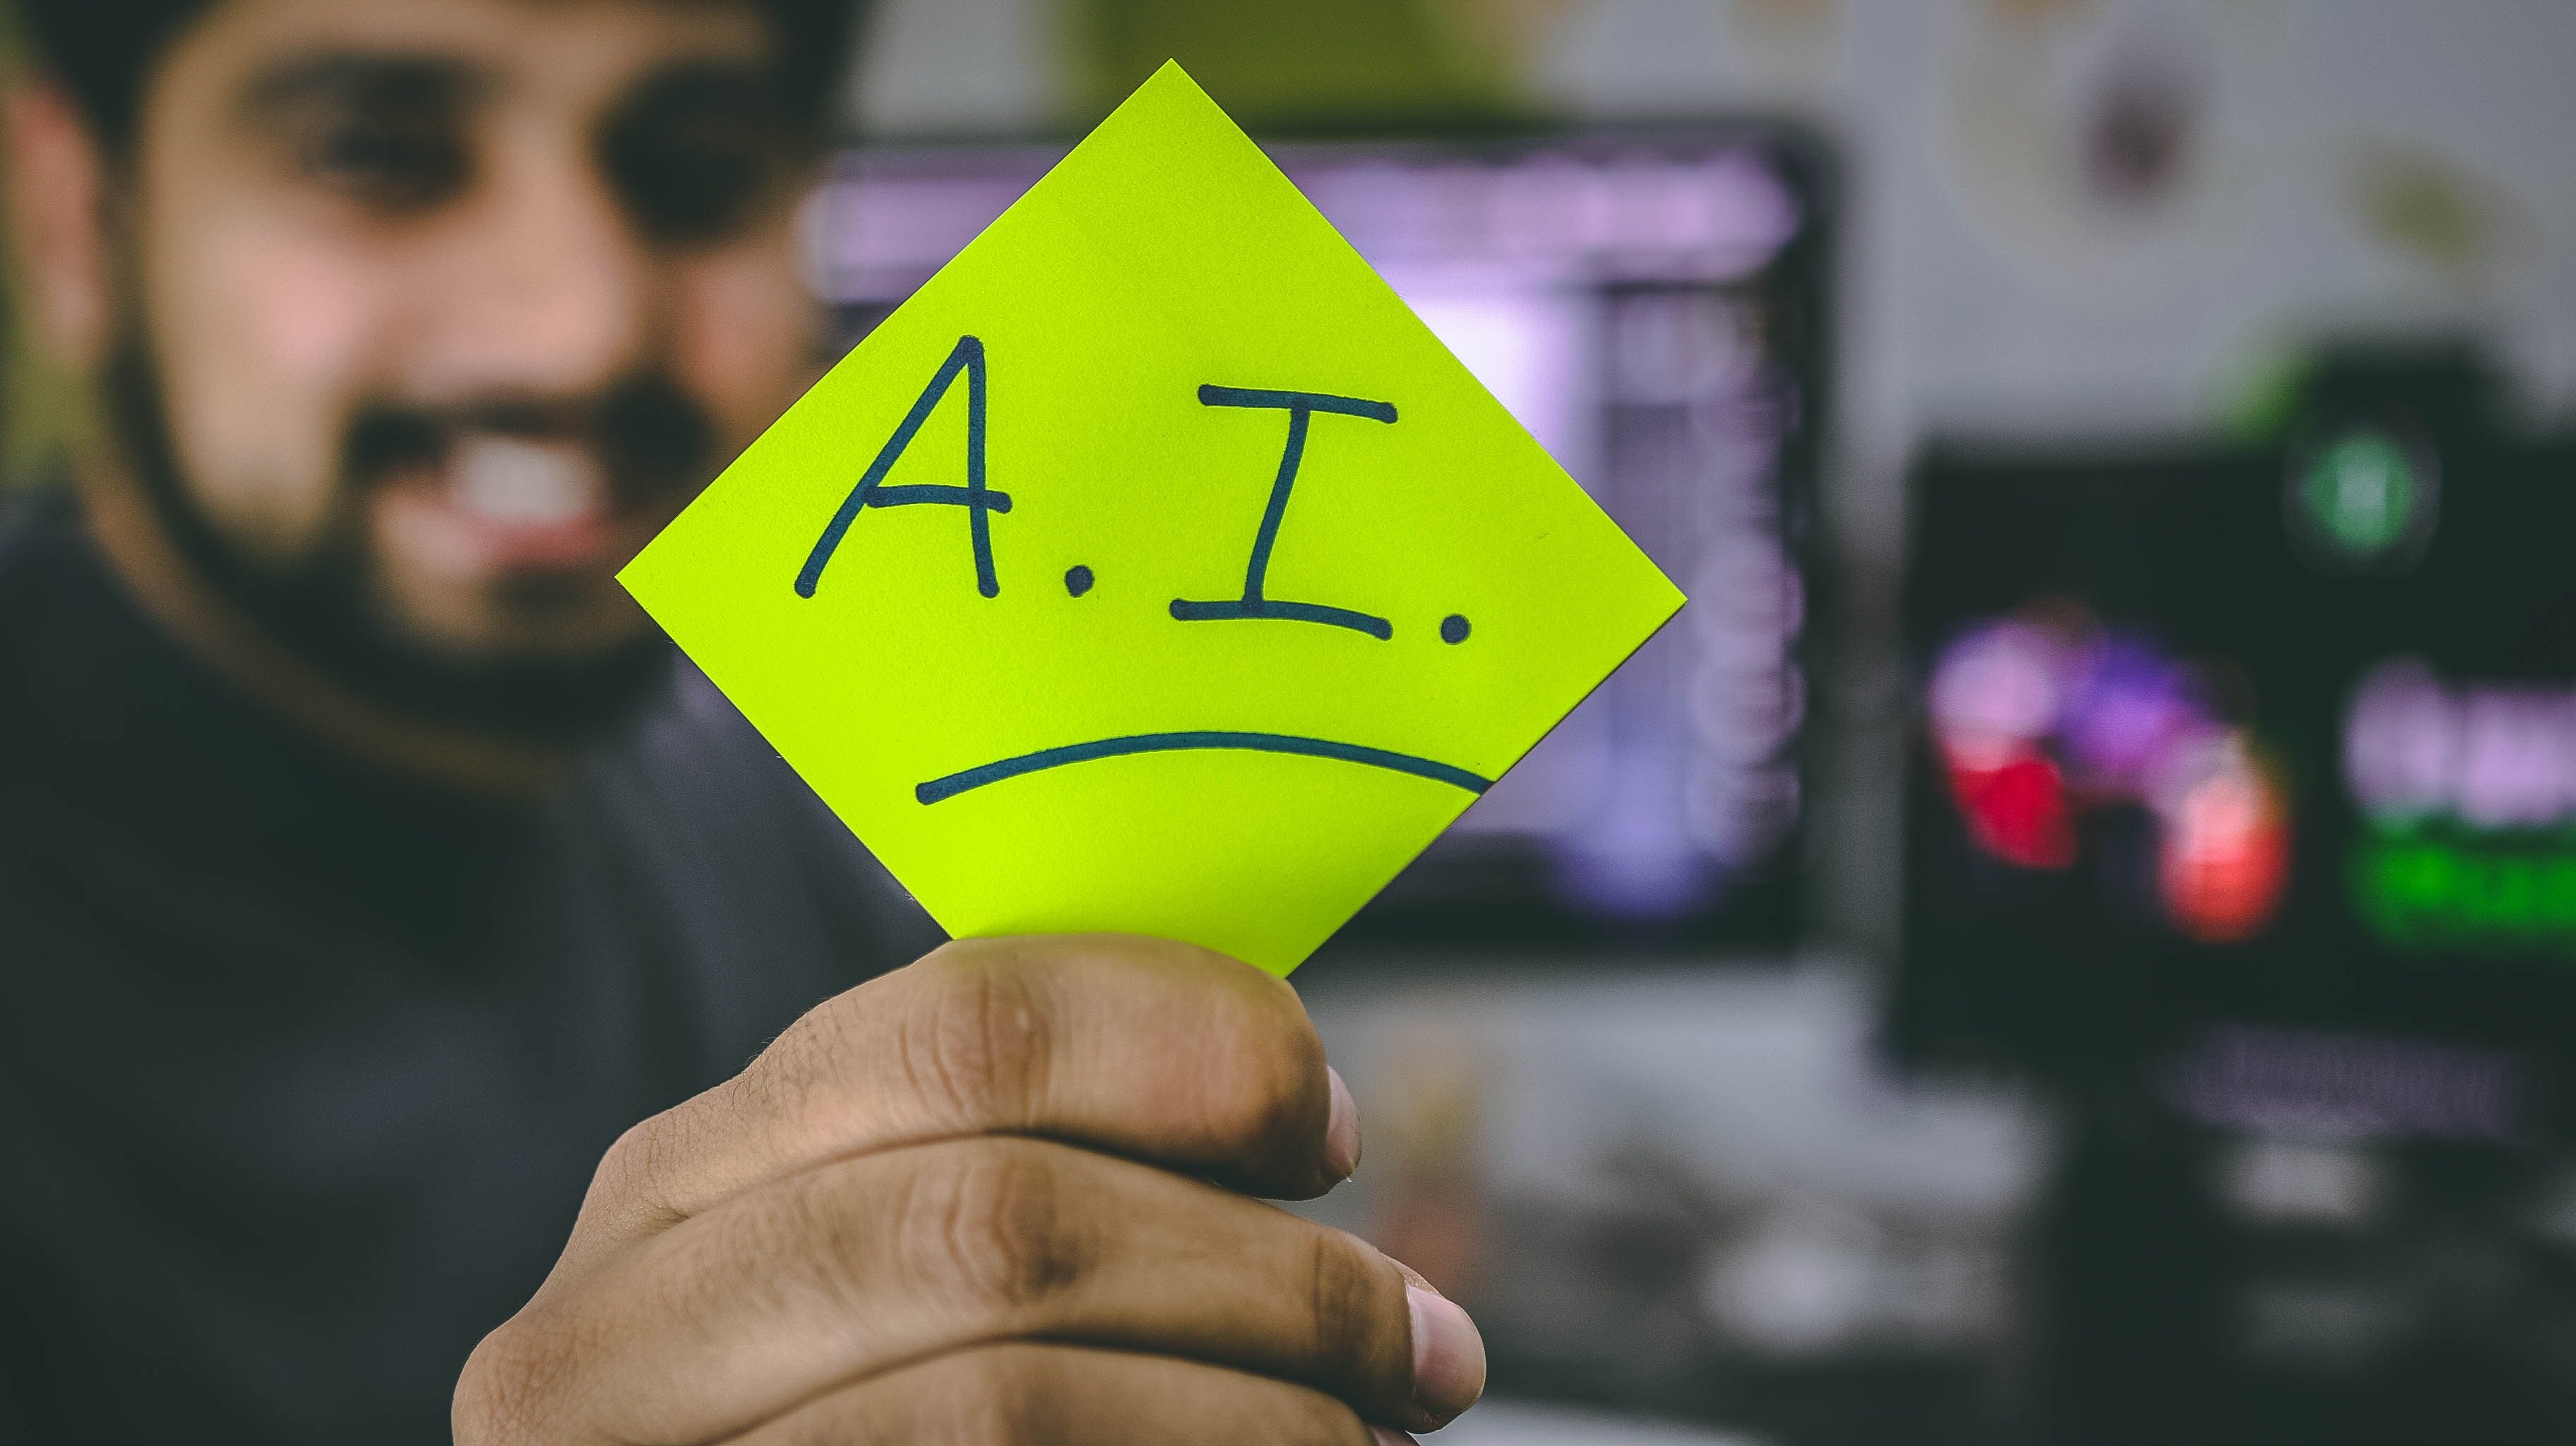 Businesses with AI focus increase profits, create jobs and perform better